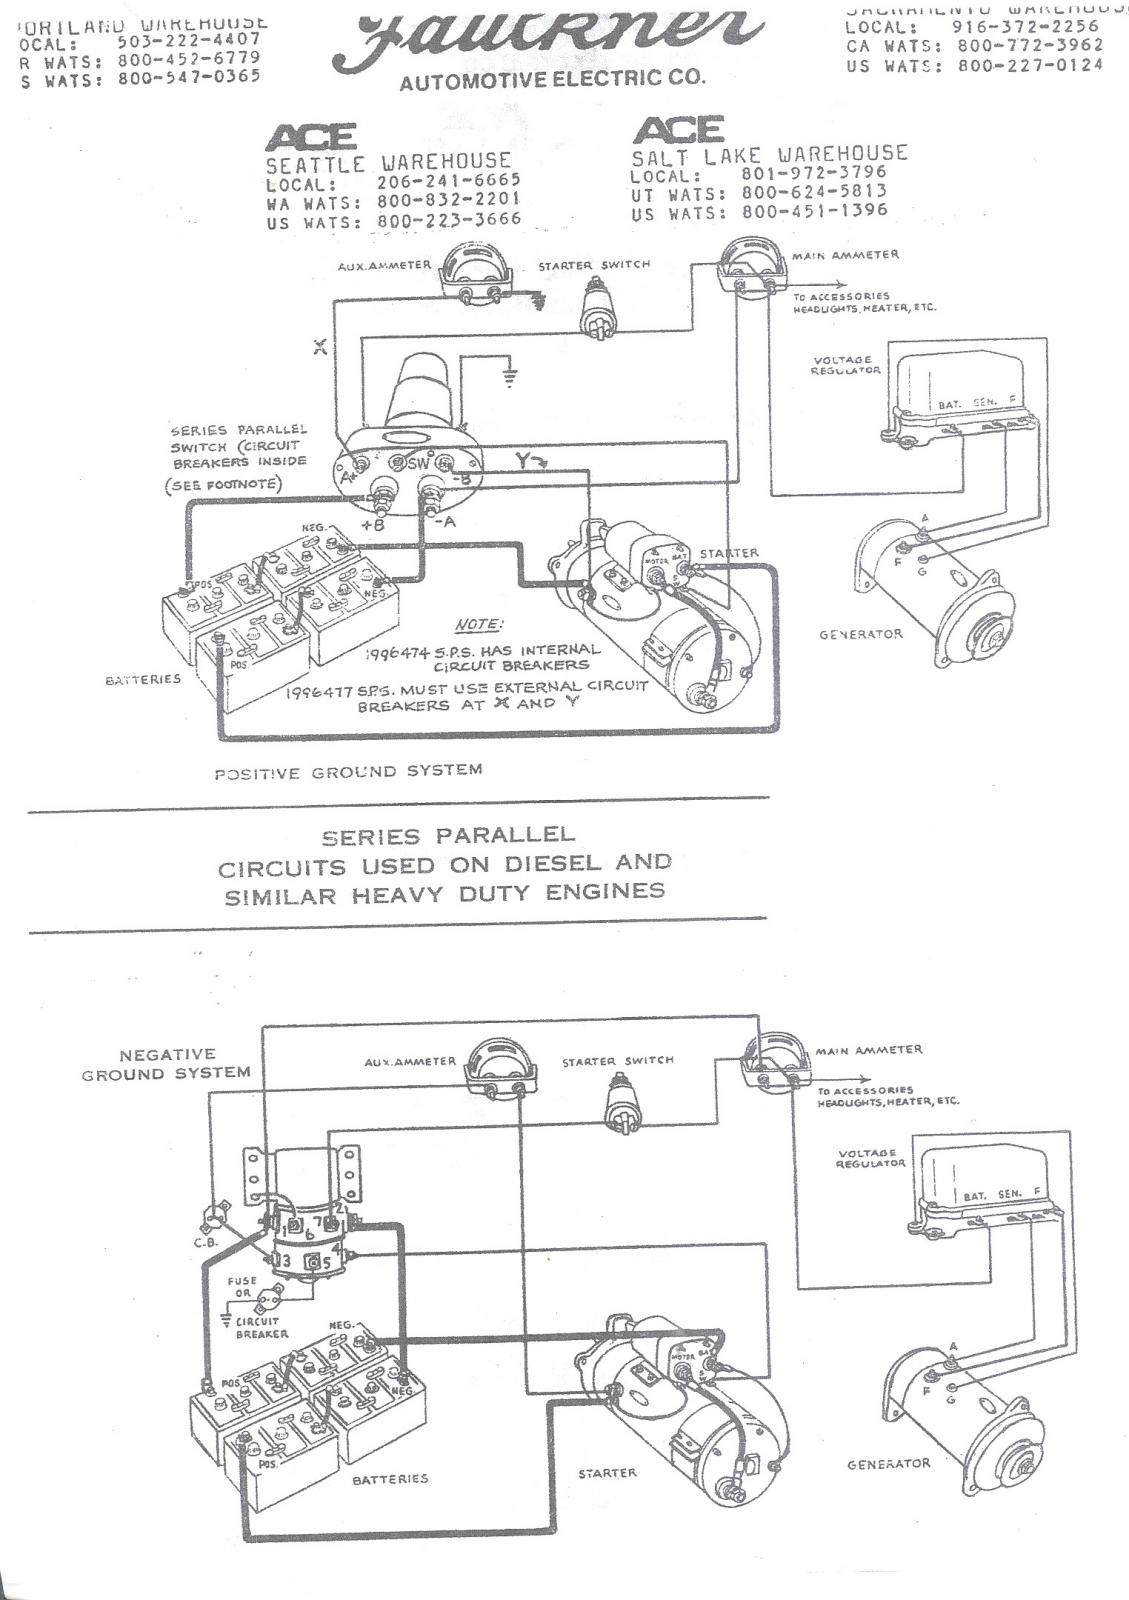 Wiring Schematic For Series Parallel Switch - Antique &amp;amp; Classic Mack - Parallel Wiring Diagram